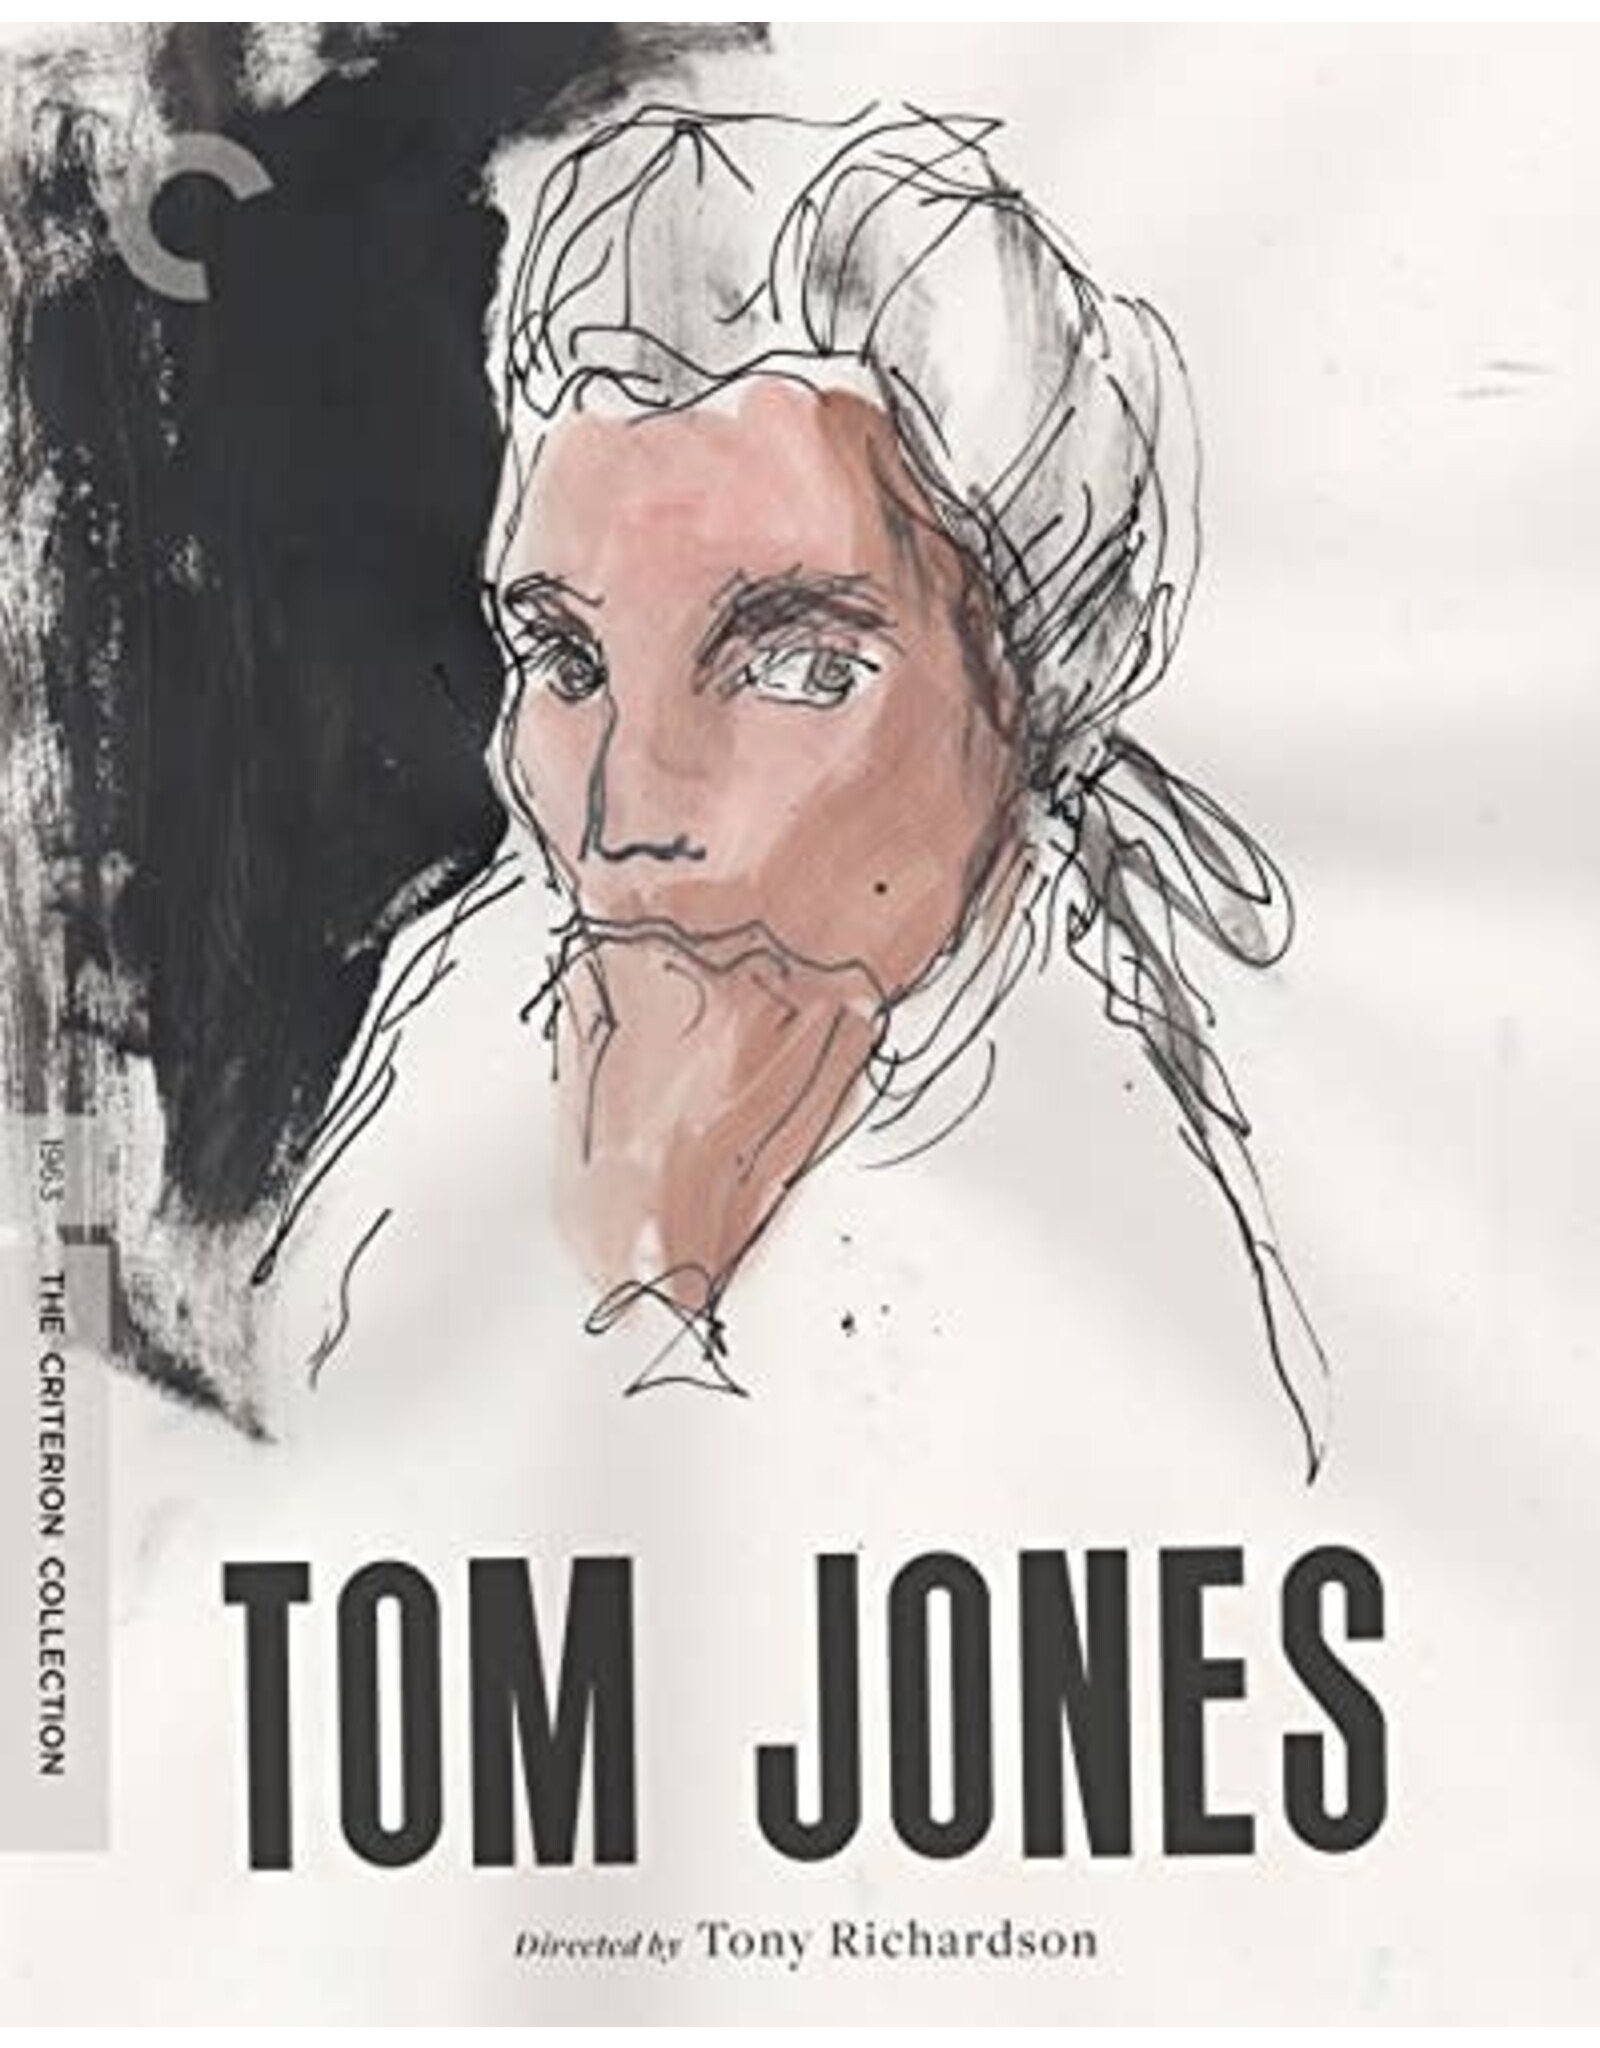 Criterion Collection Tom Jones - Criterion Collection (Brand New)